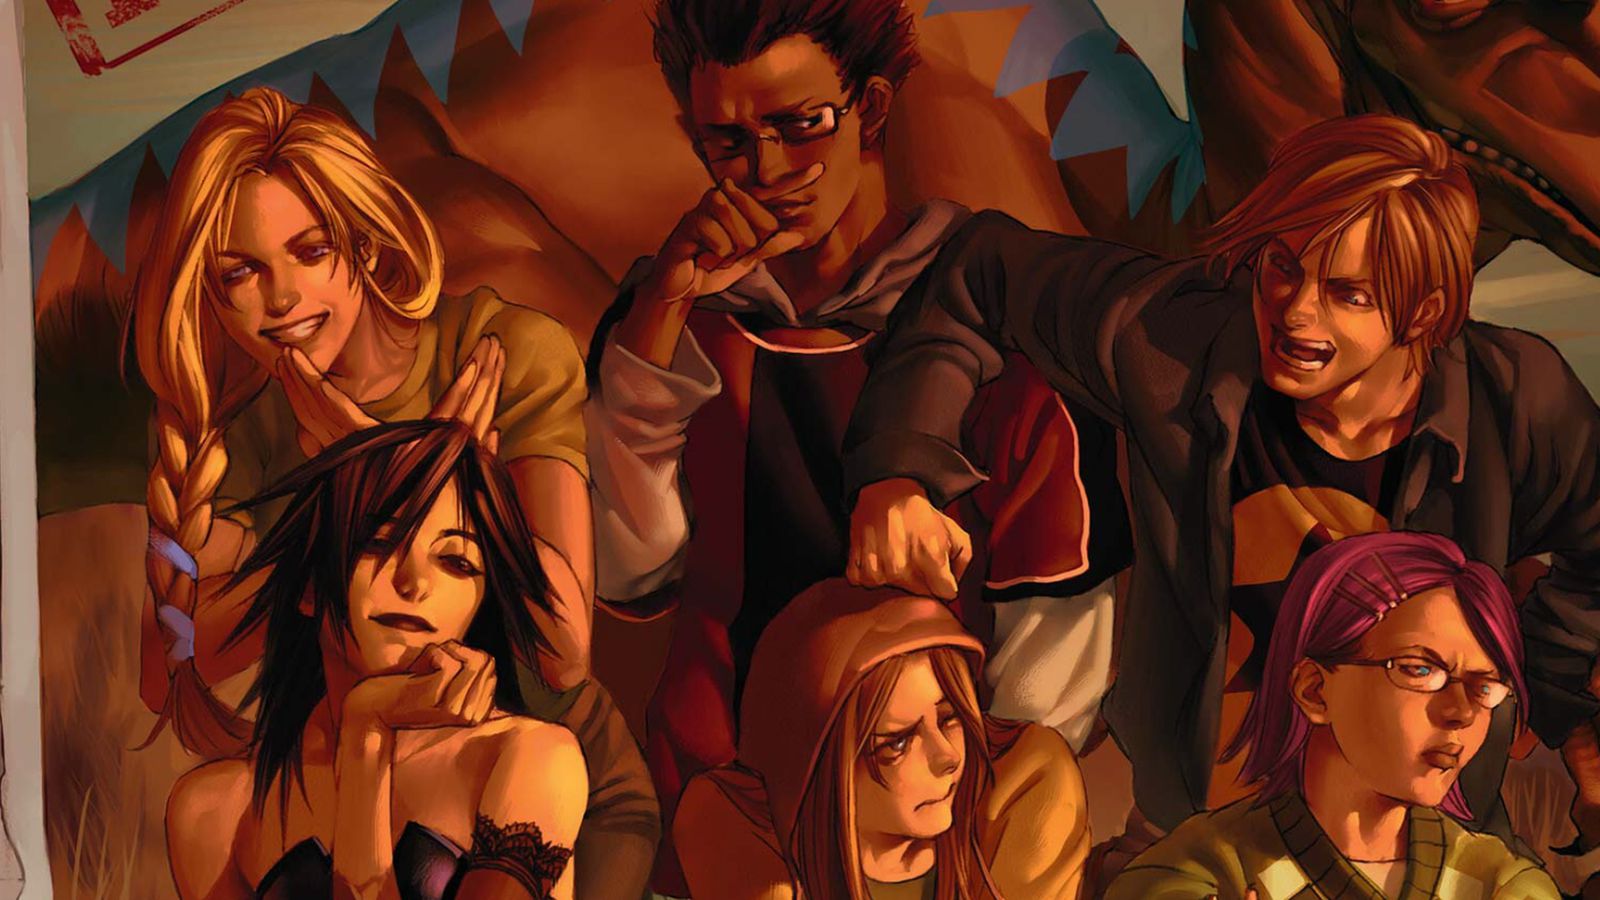 Marvel's Runaways exists in the same world as the MCU, but what does that mean?